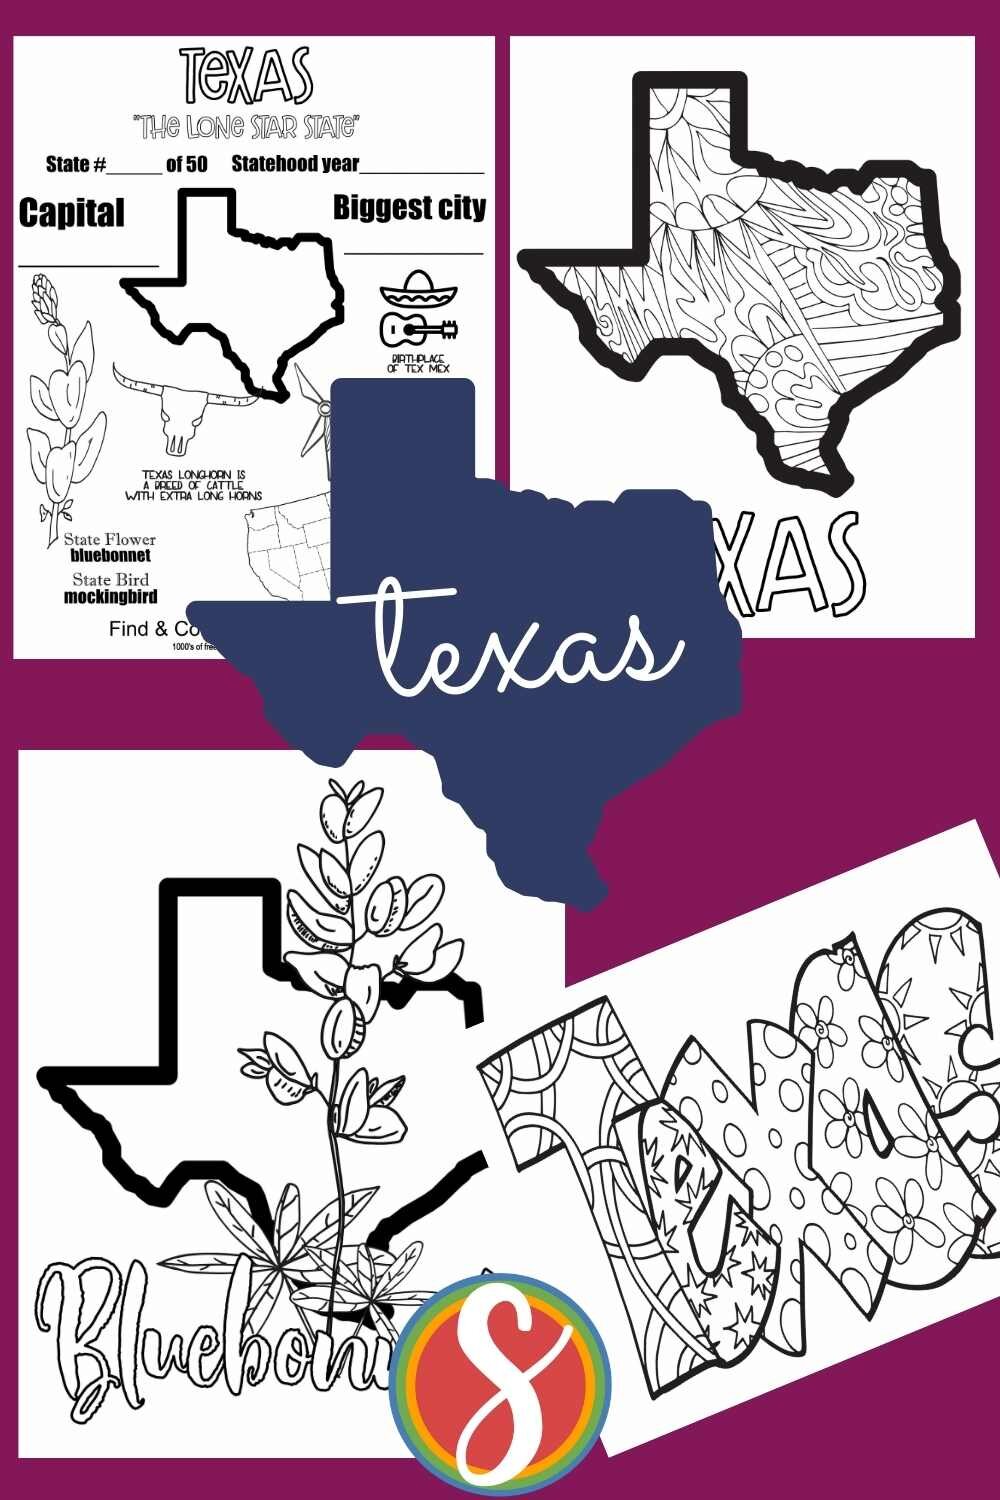 Free 4 Texas coloring pages to print and color from Stevie Doodles - print and color these Texas pages today